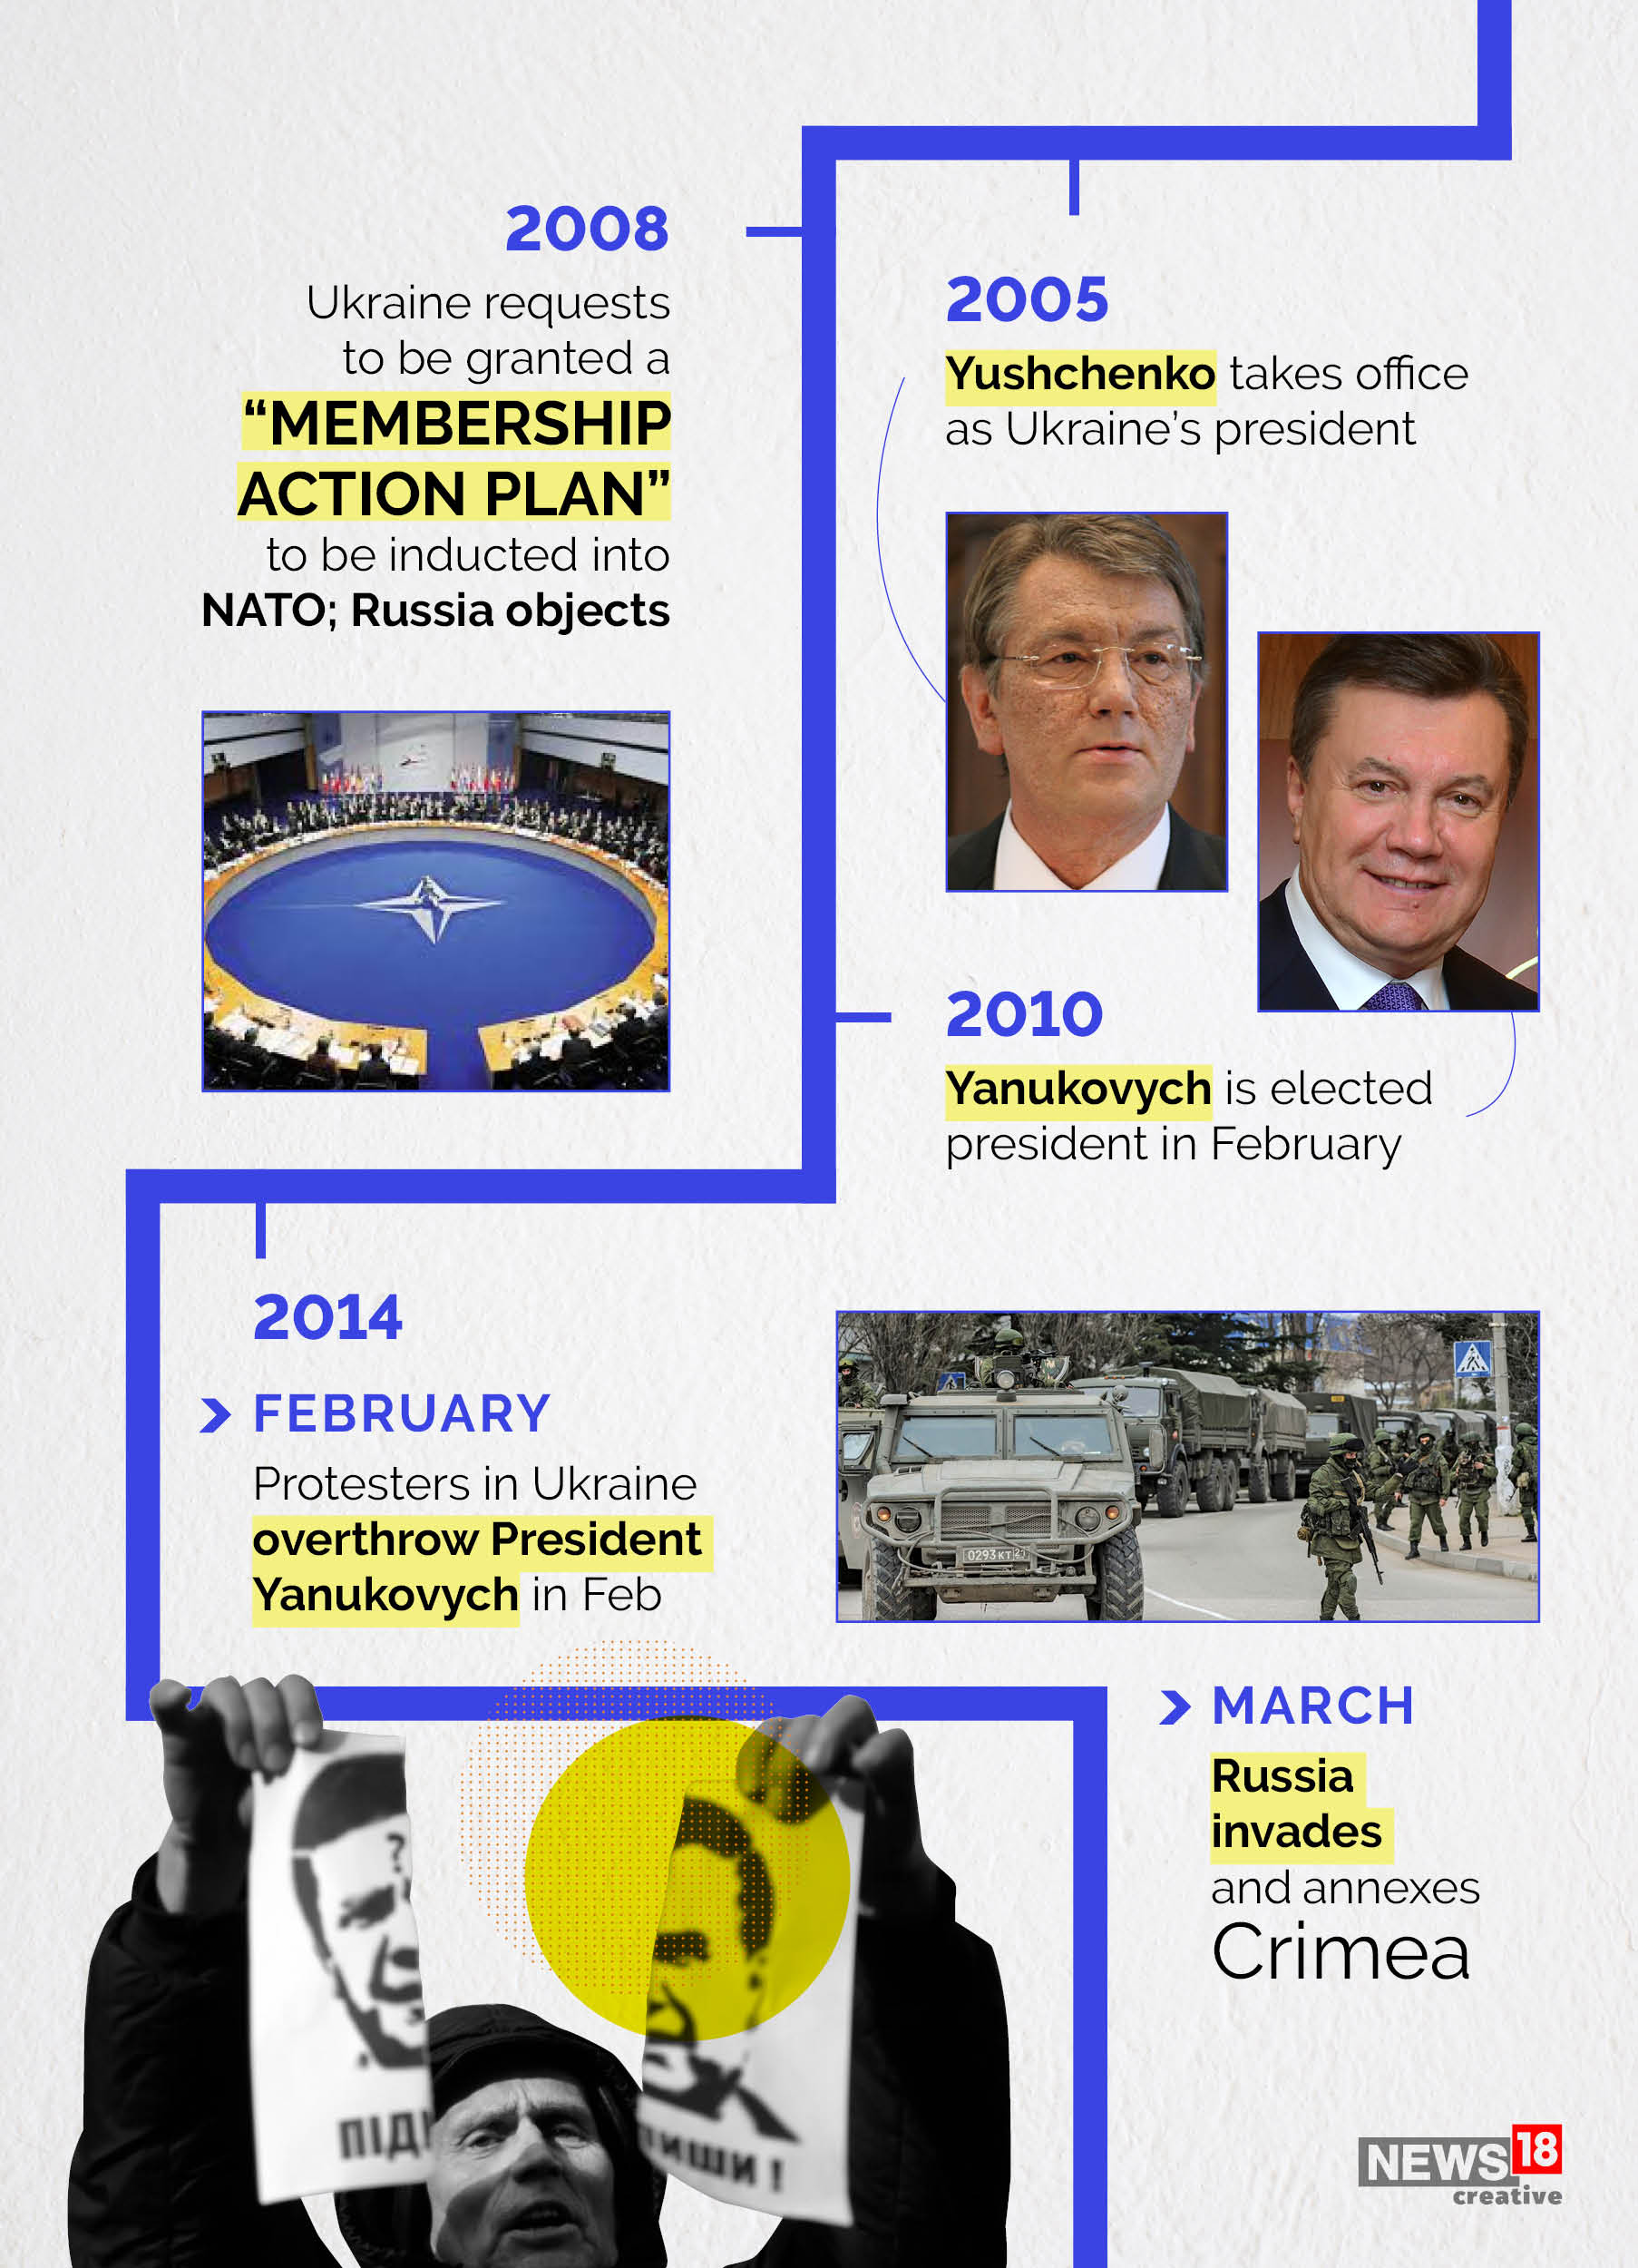 Timeline: 30 years and pivotal events that led to Russia's Ukraine invasion